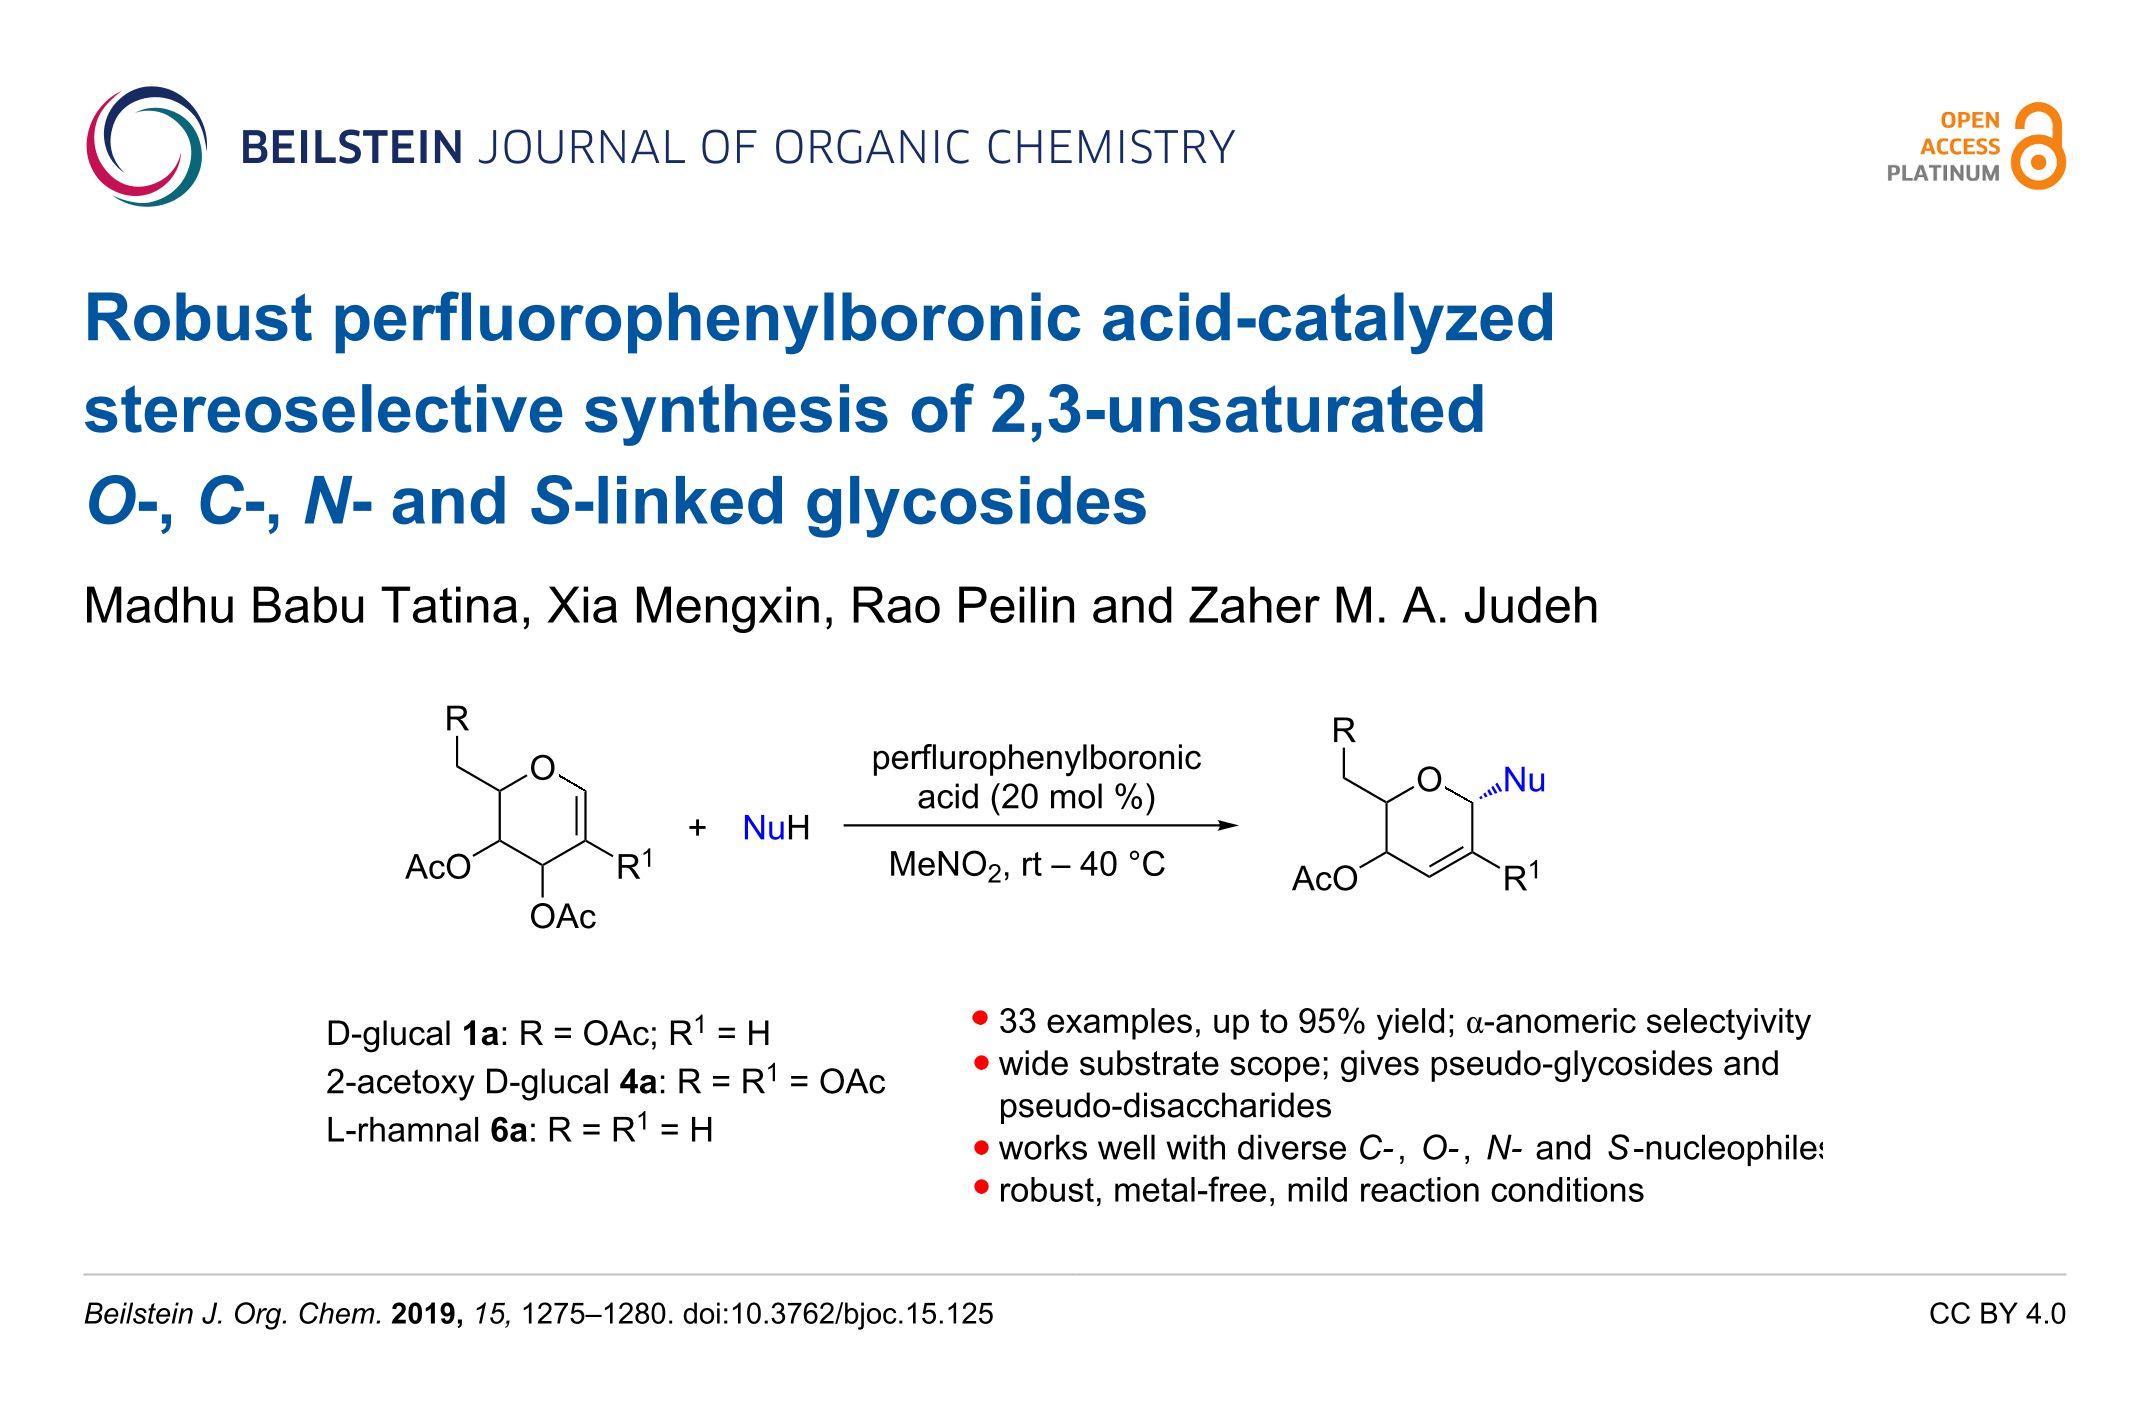 Bjoc Robust Perfluorophenylboronic Acid Catalyzed Stereoselective Synthesis Of 2 3 Unsaturated O C N And S Linked Glycosides